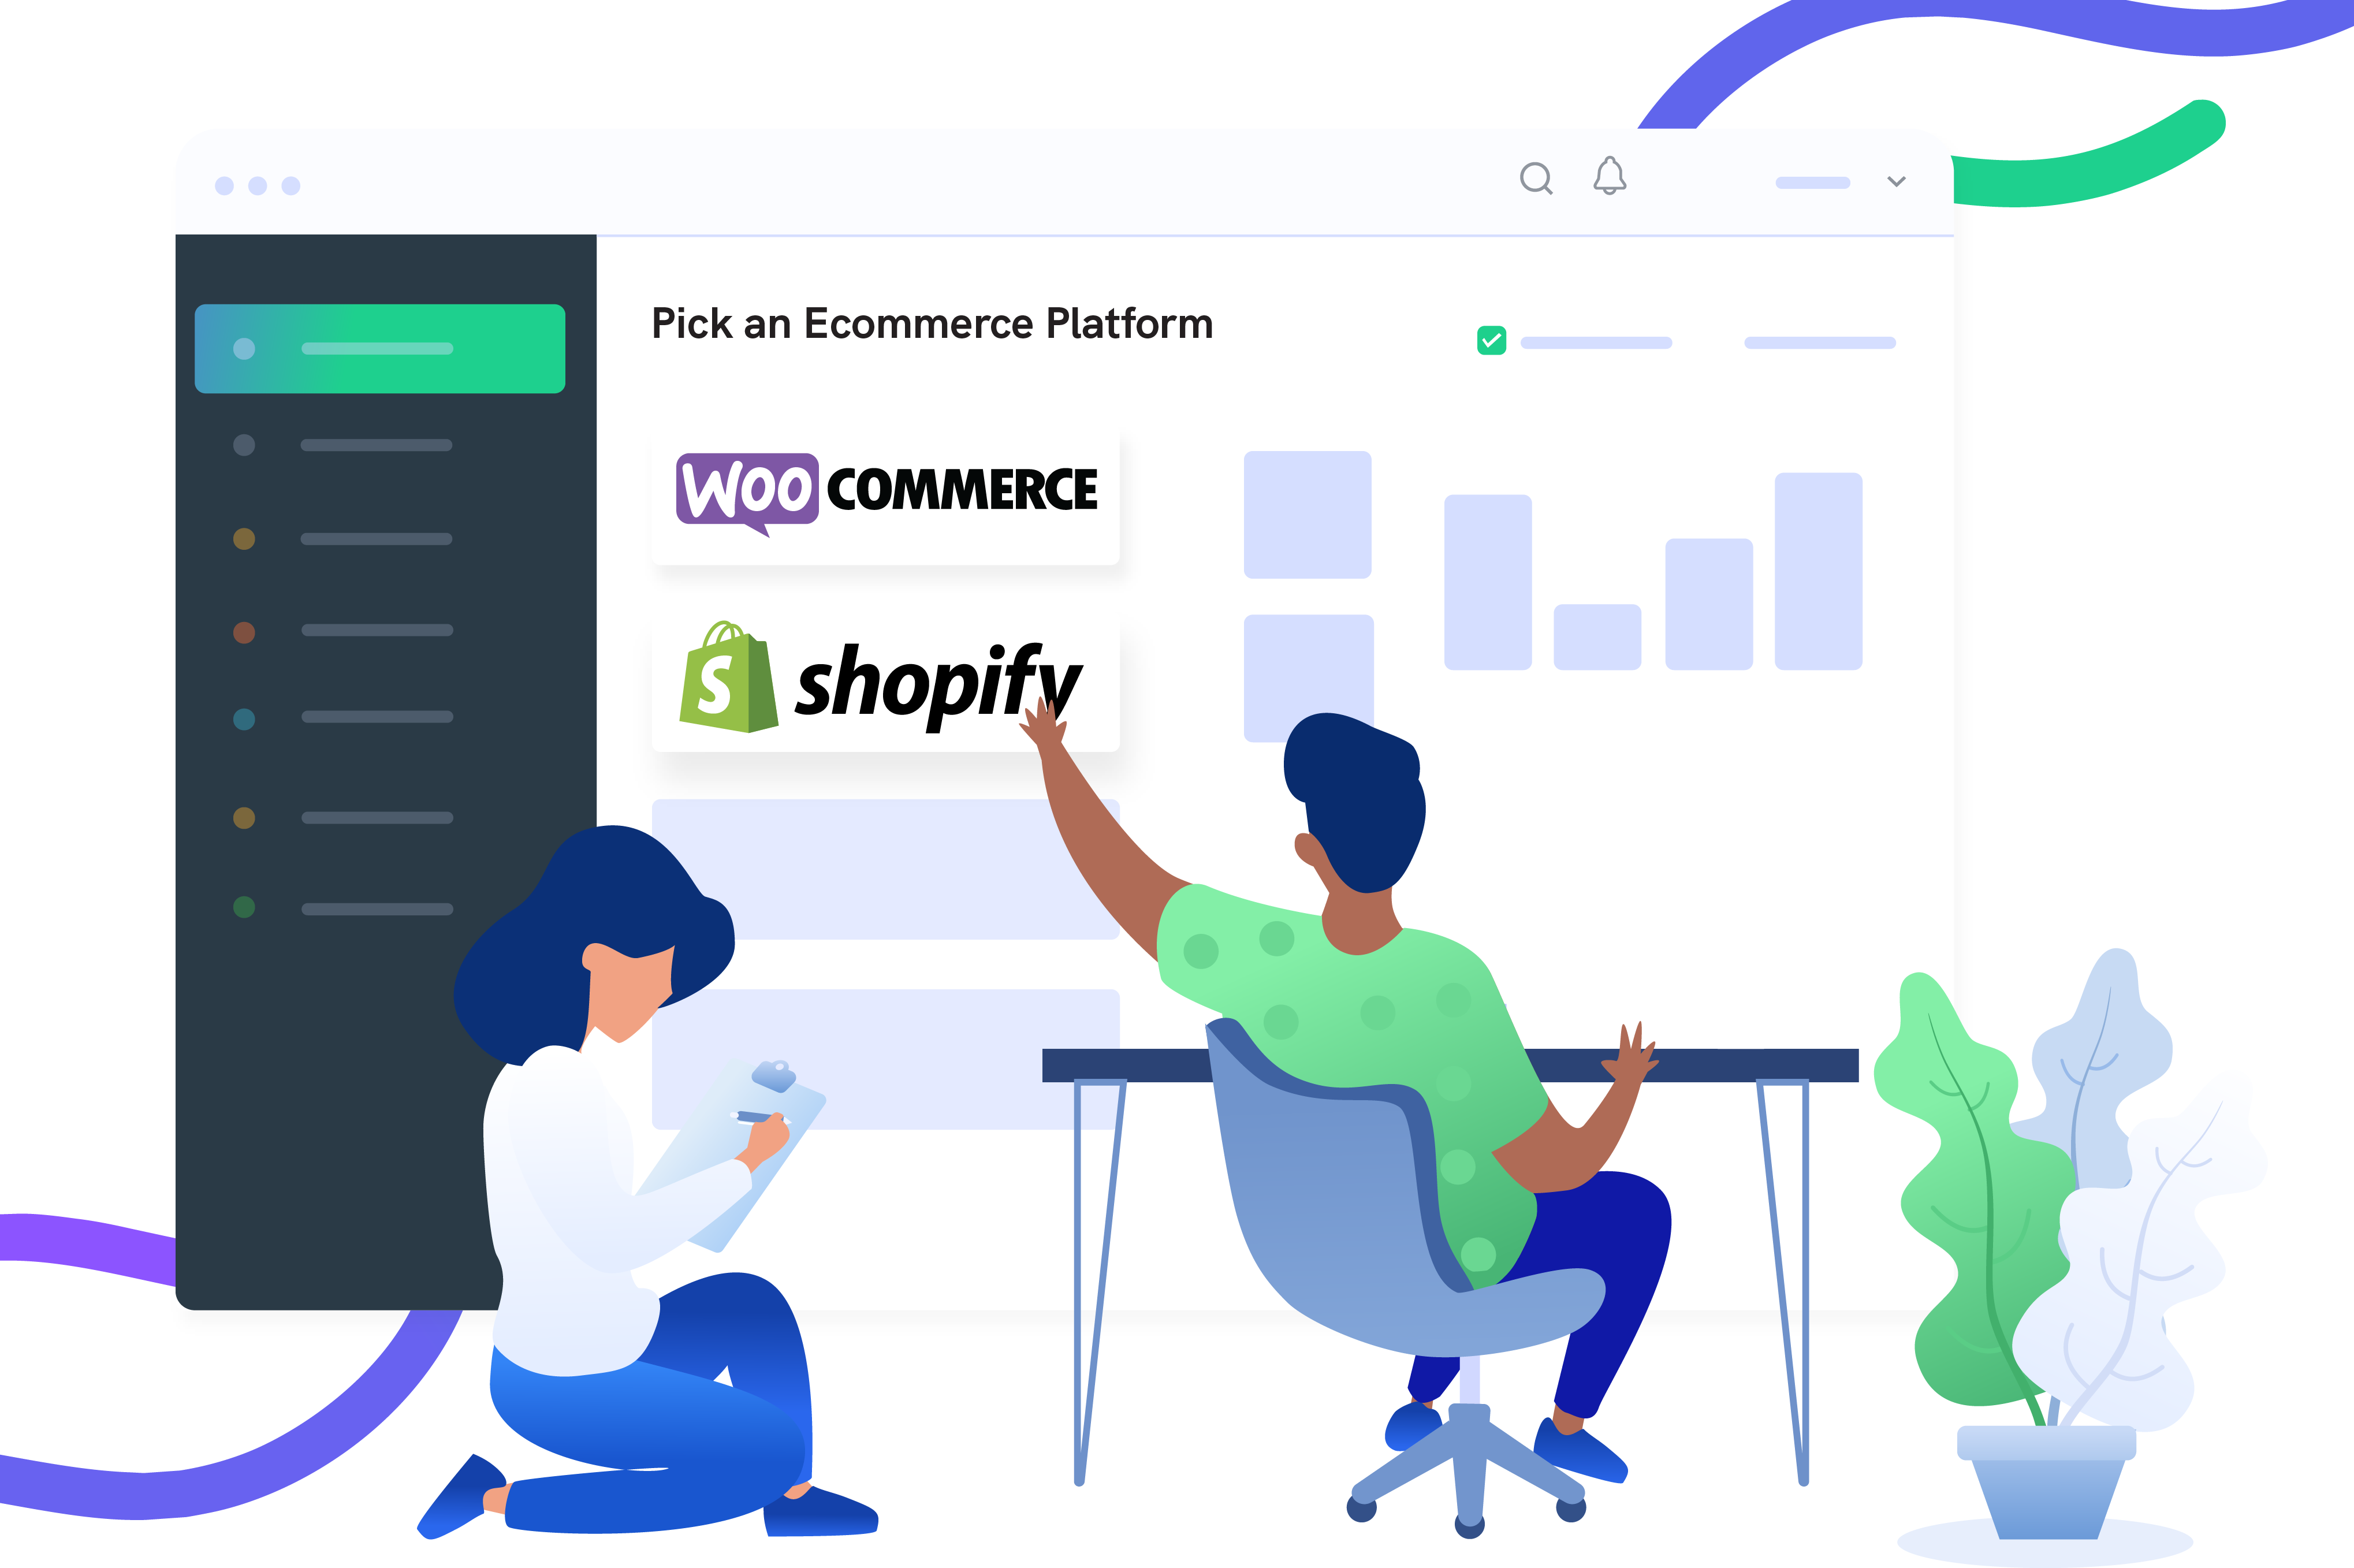 Which ecommerce platform is better for subscriptions: WooCommerce or Shopify?